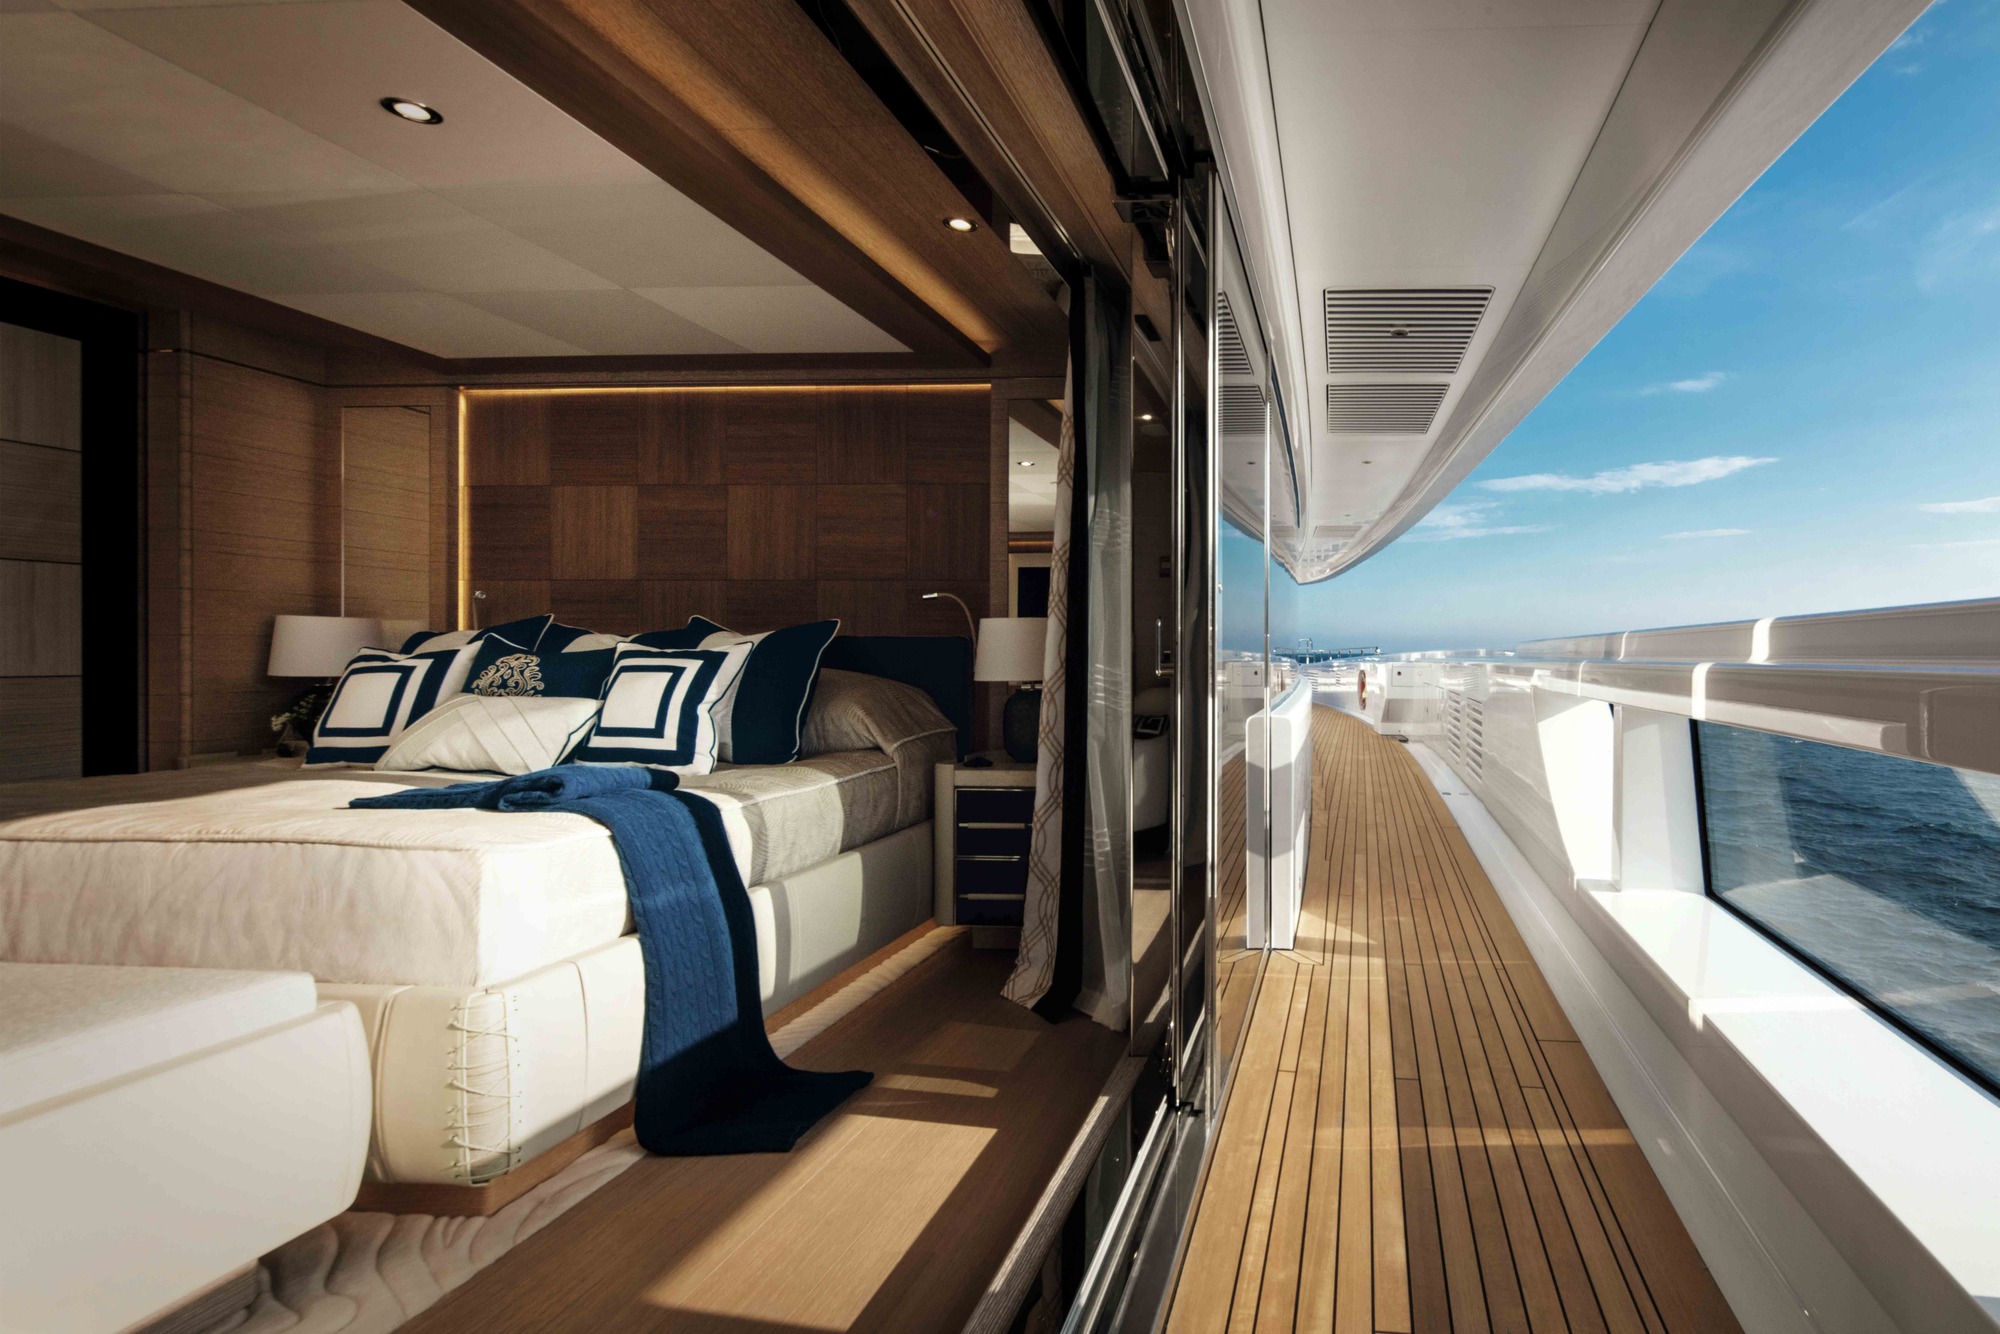 VIP Suite With Doors That Open For Fresh Air And Direct Access To The Deck